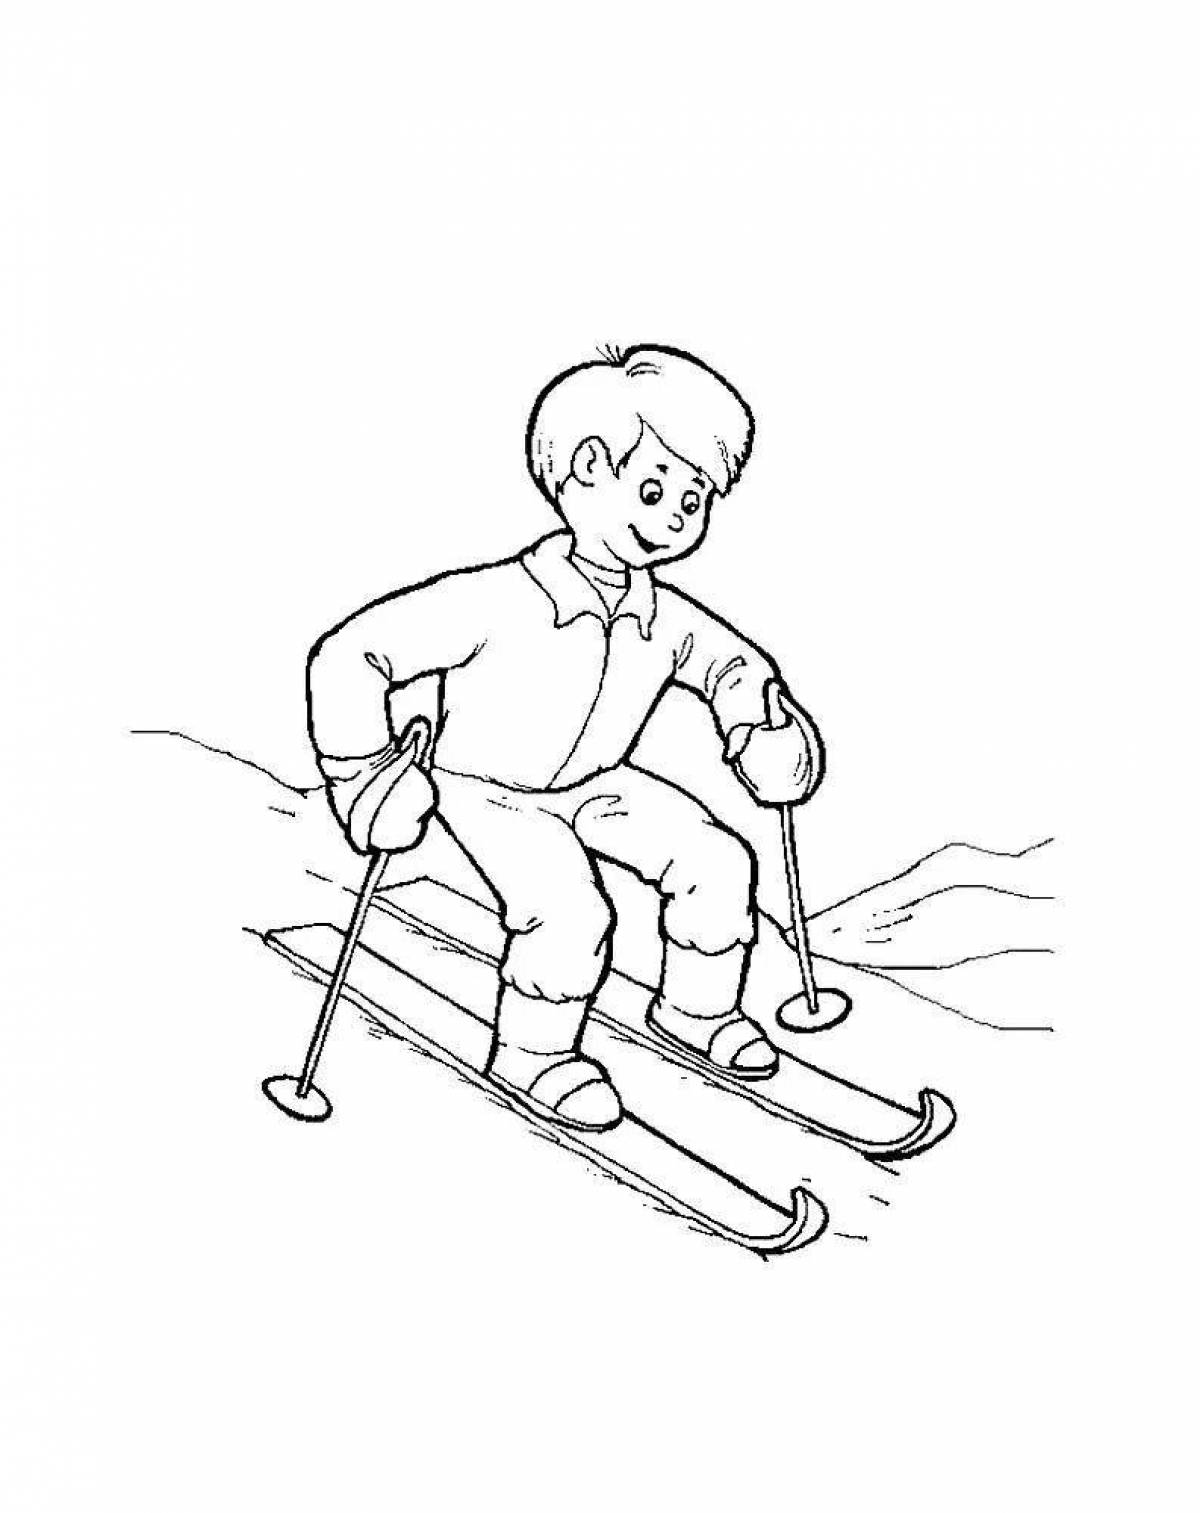 Sparkling skis coloring page